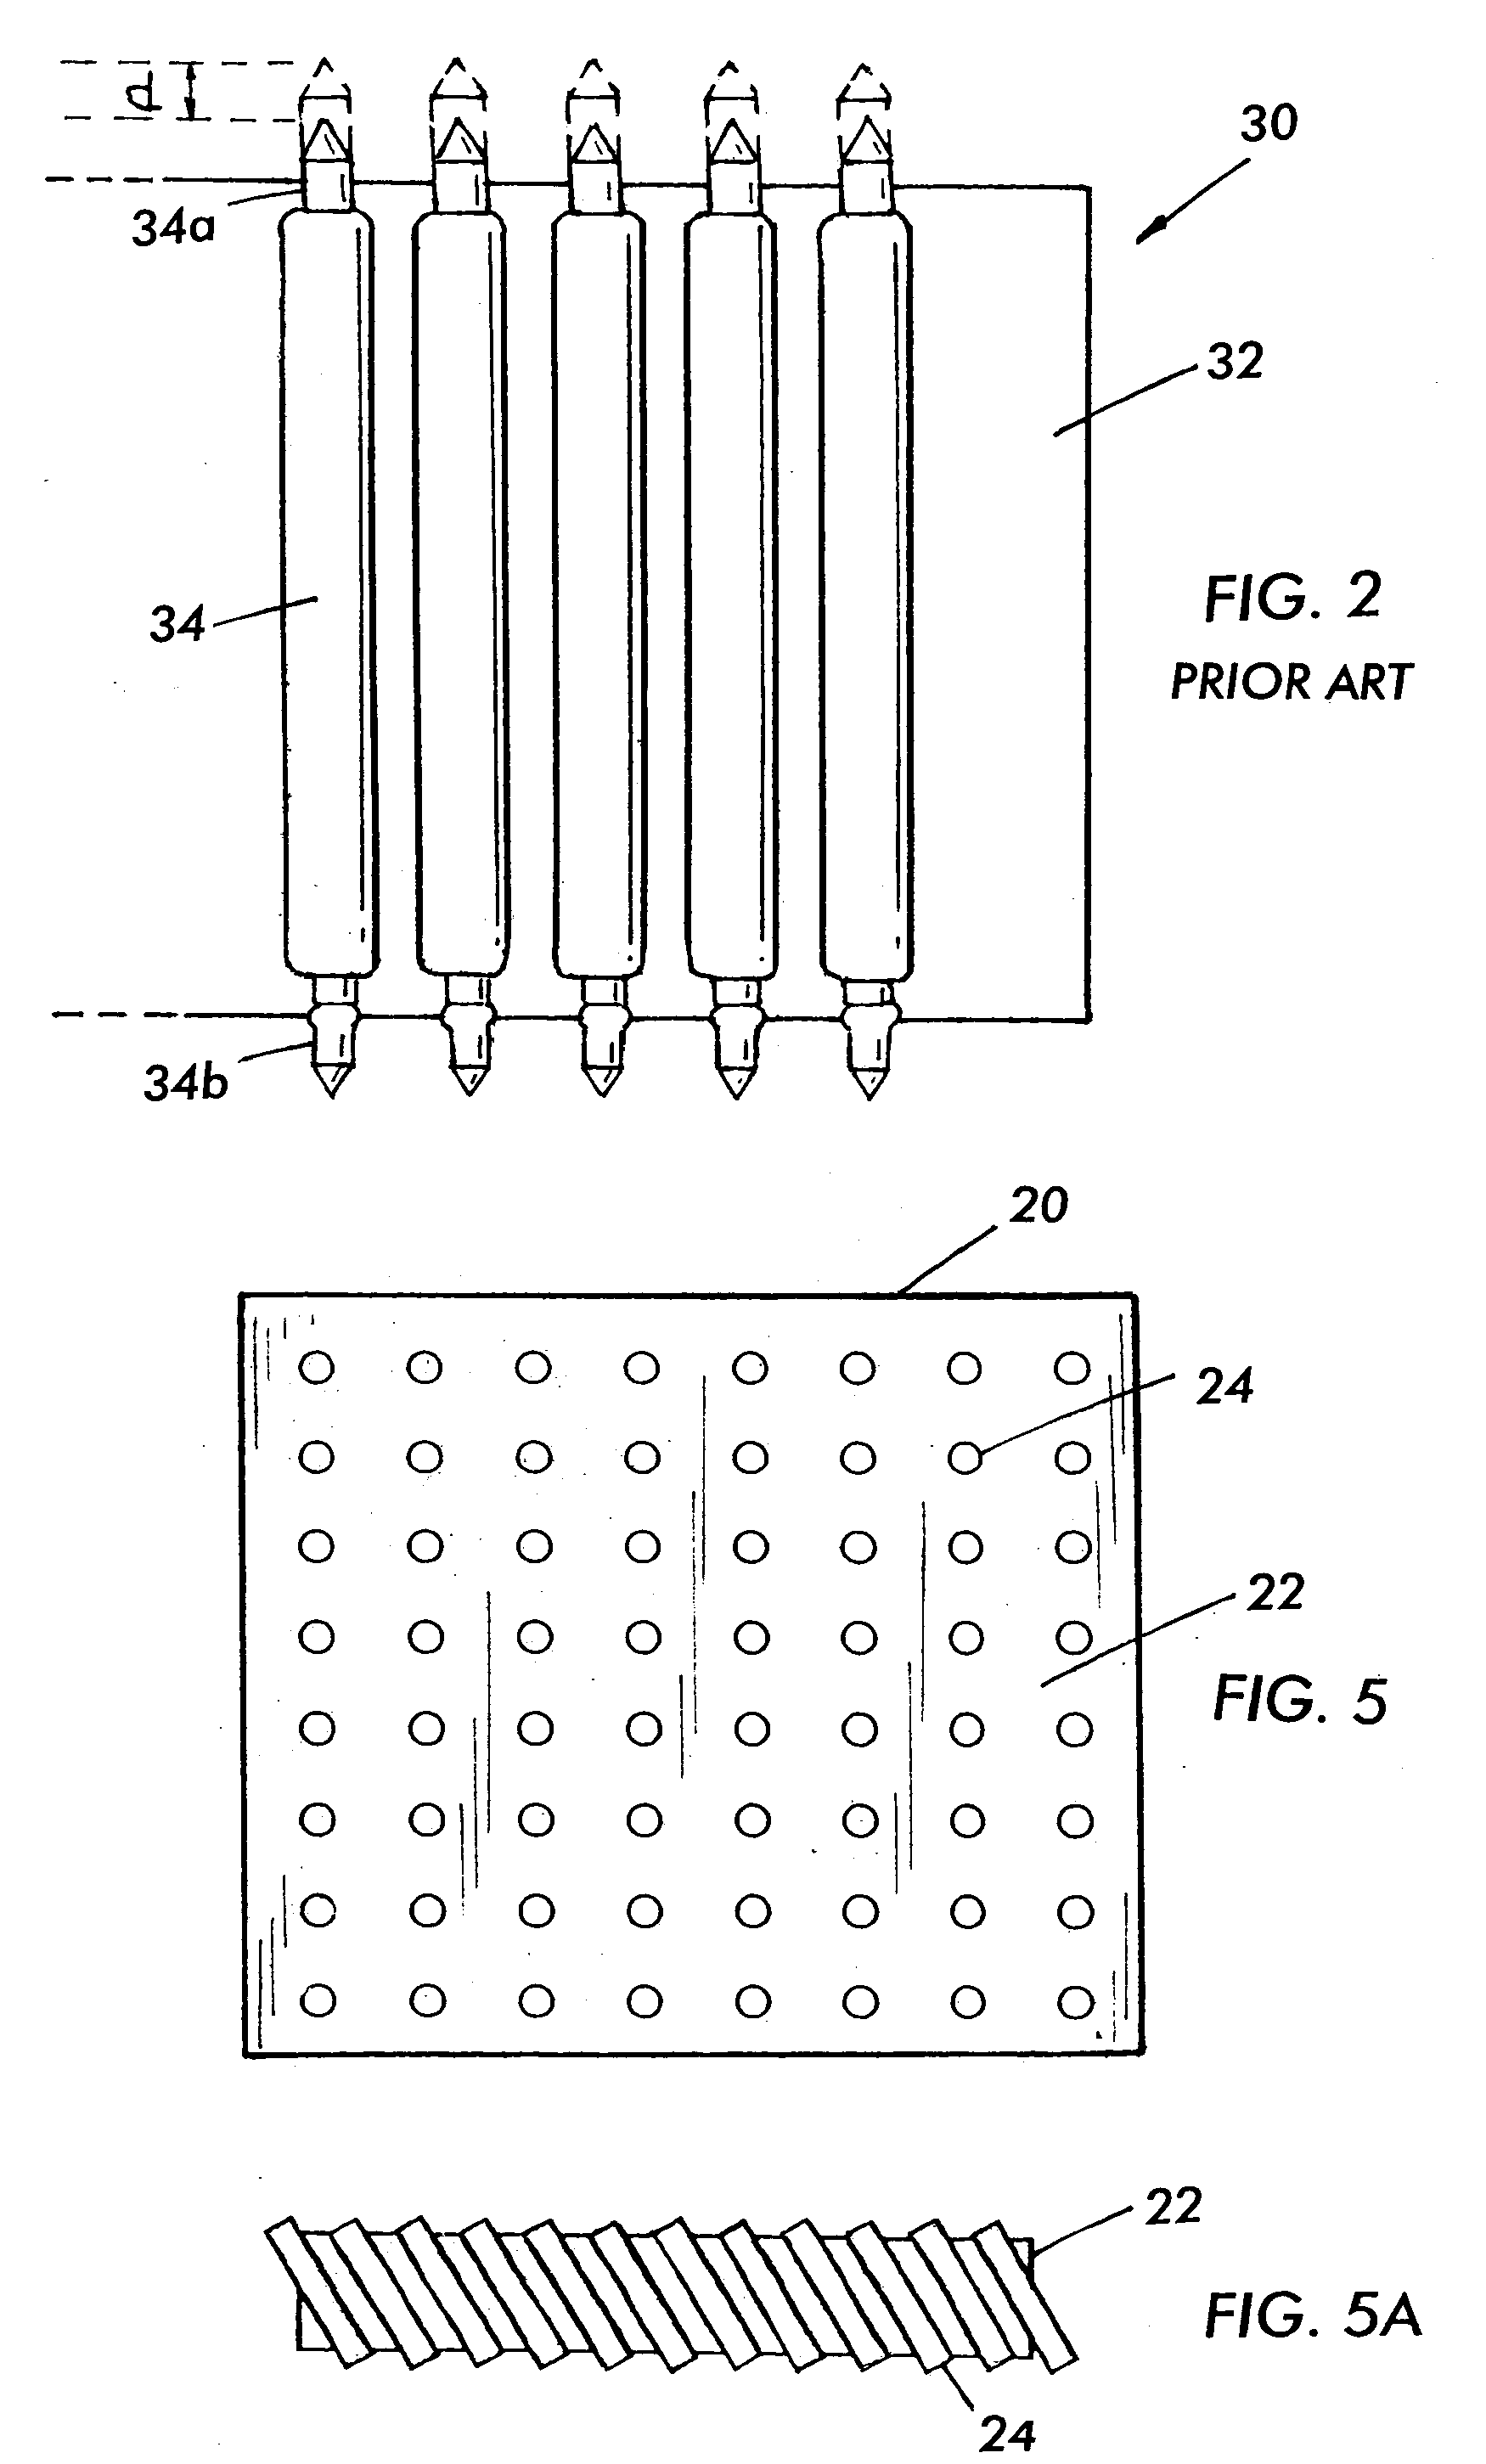 Test arrangement including anisotropic conductive film for testing power module